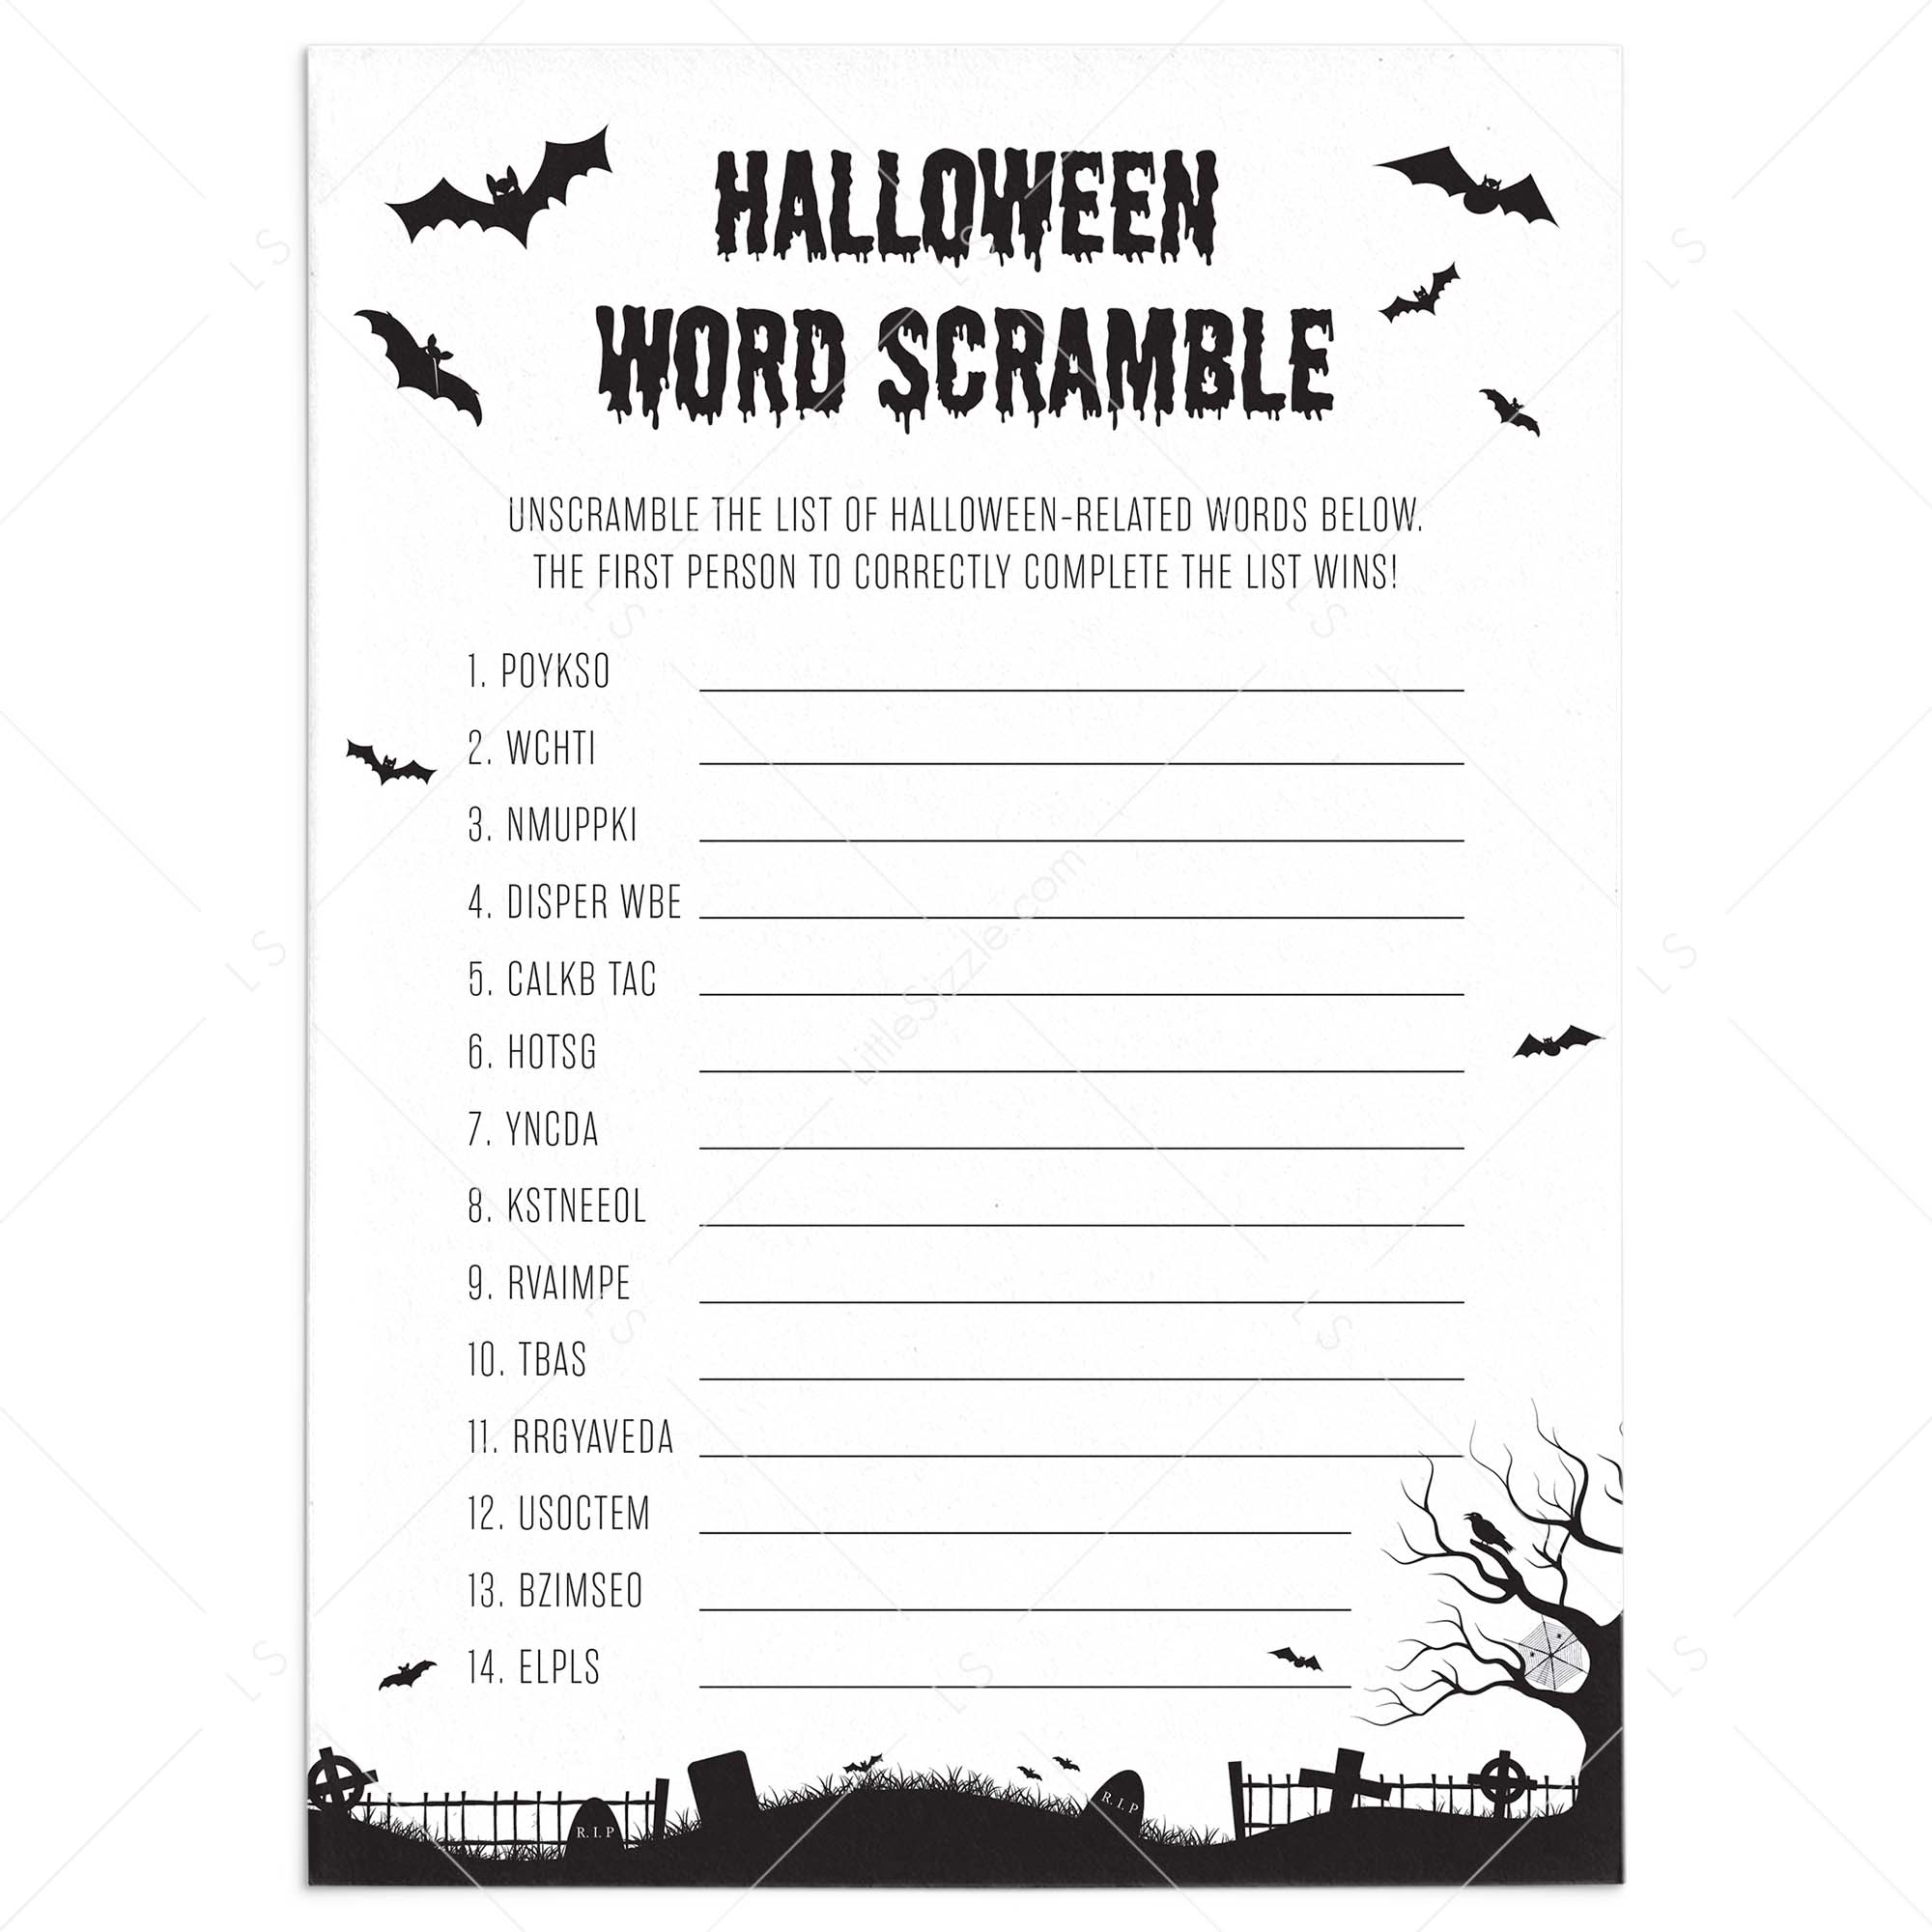 Halloween Word Scramble with Answers Printable Instant Download by LittleSizzle